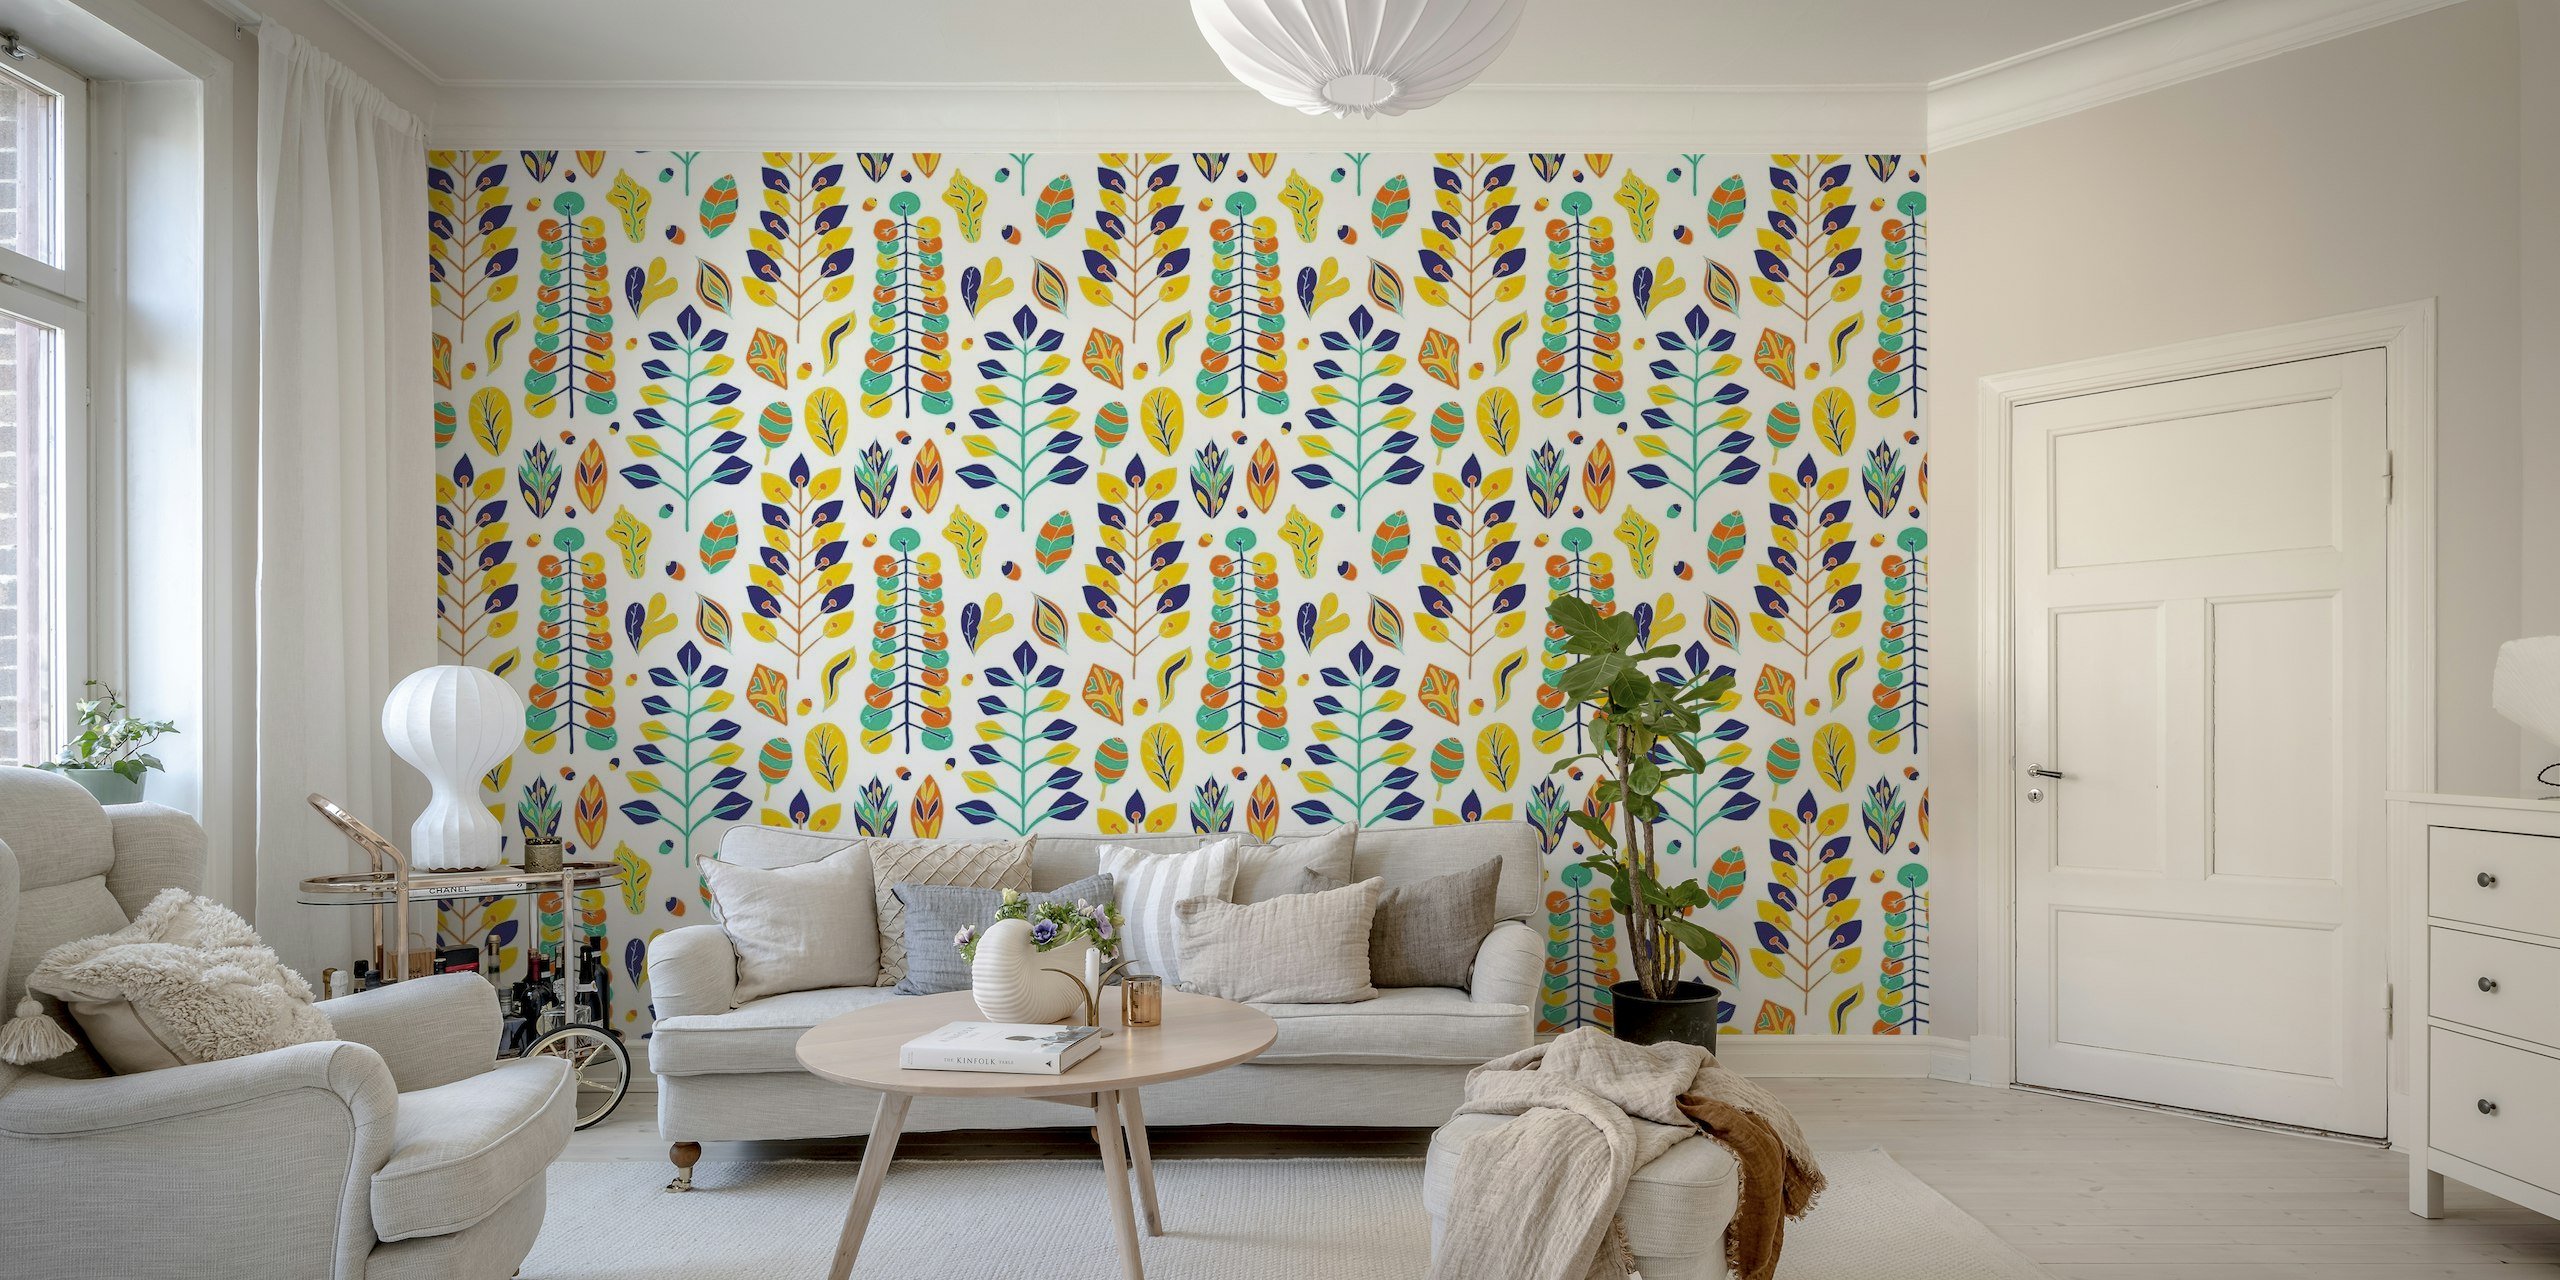 Scandinavian-style wall mural with summer foliage and berries in vibrant colors